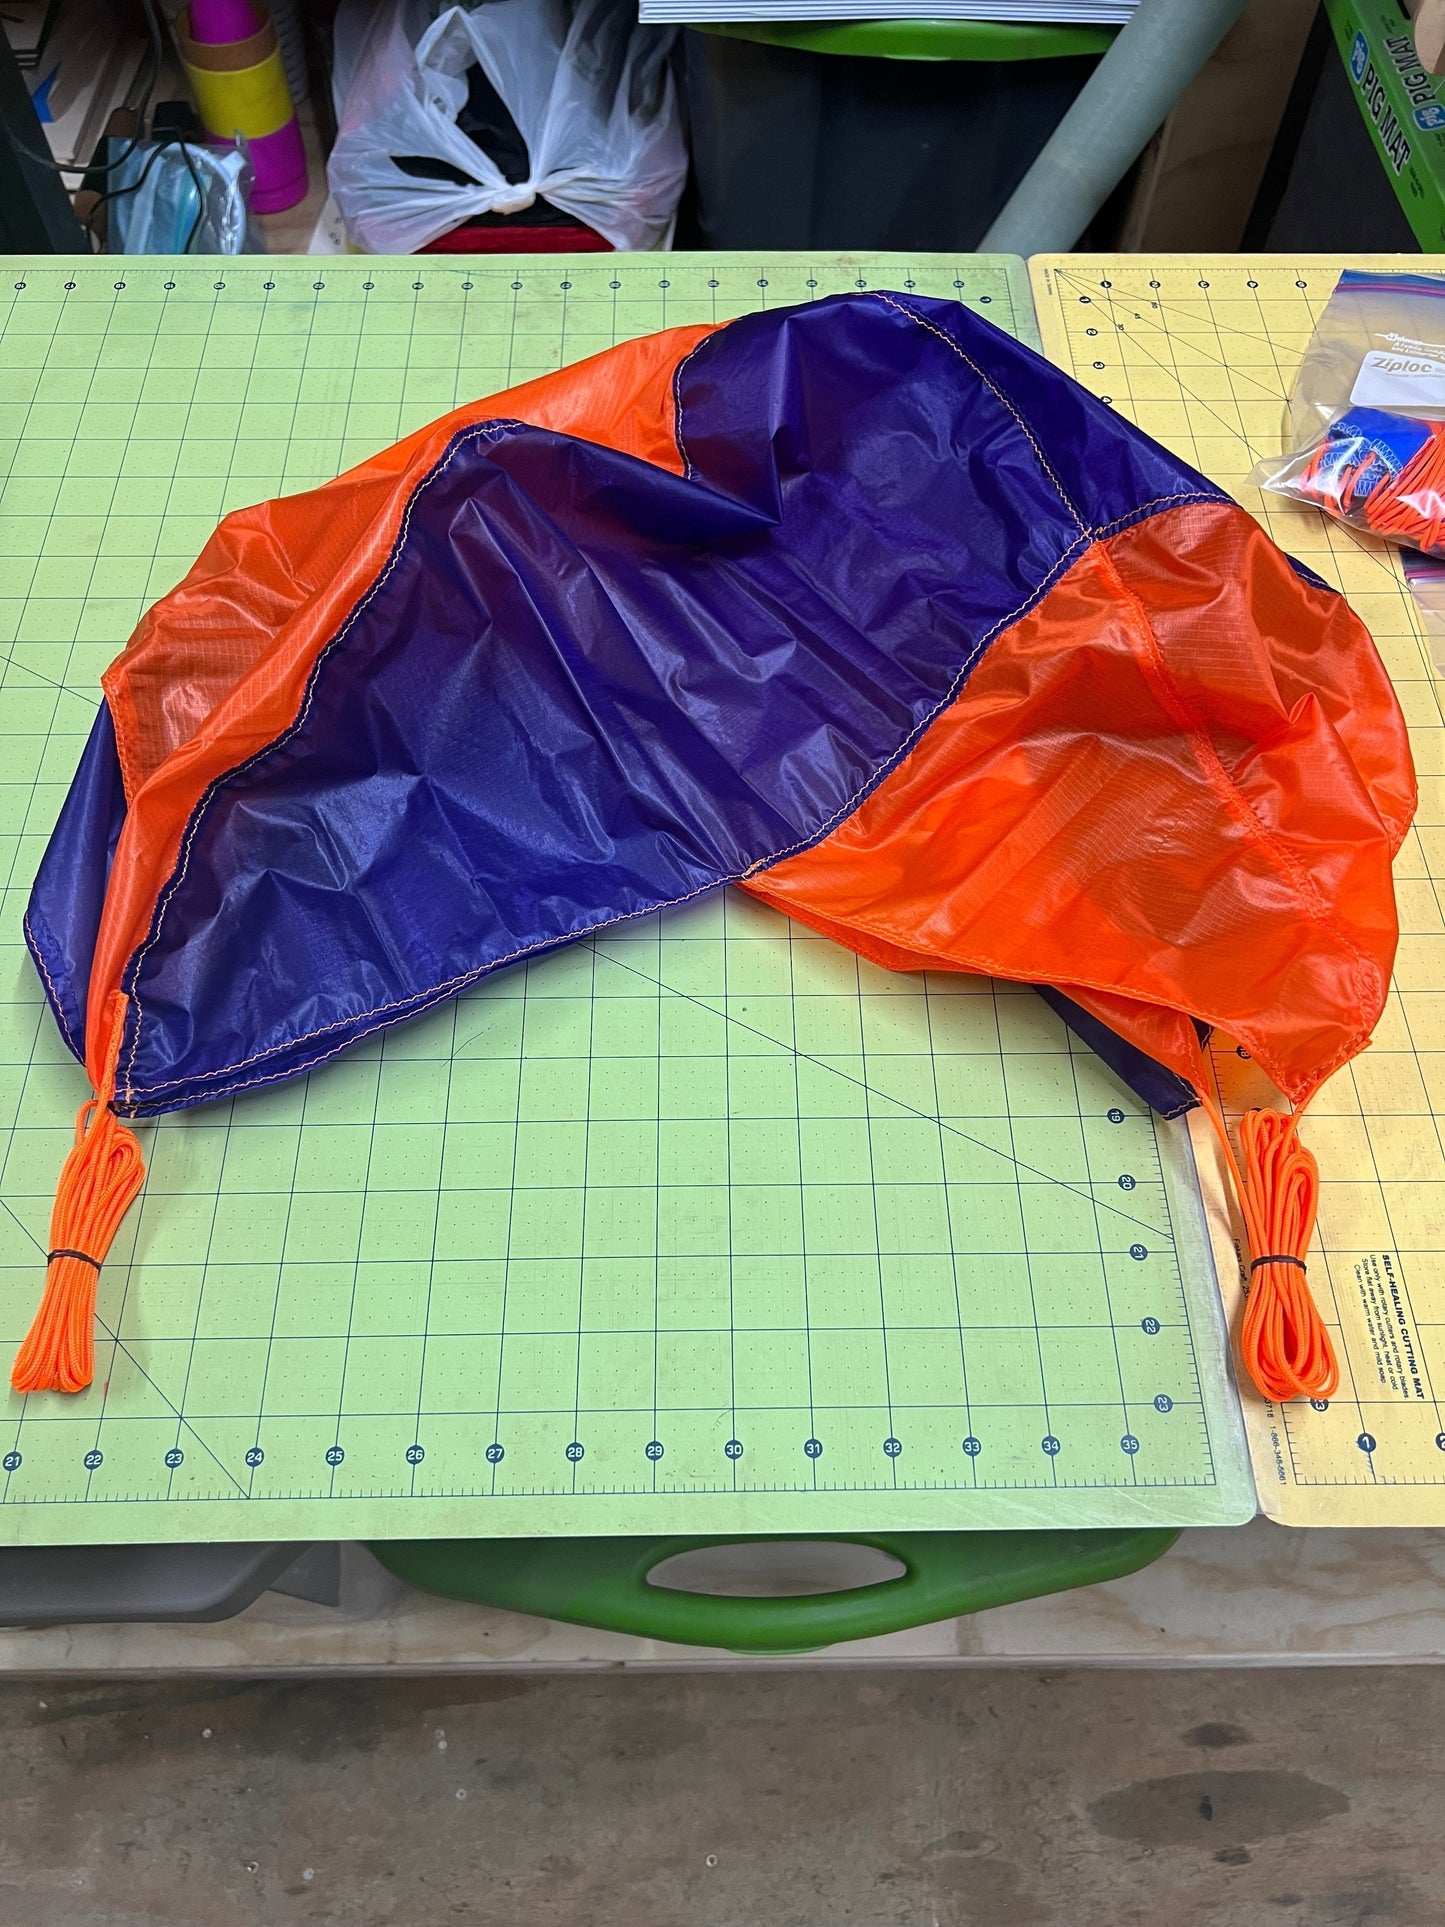 DR-16 Parabolic Cupped Parachute